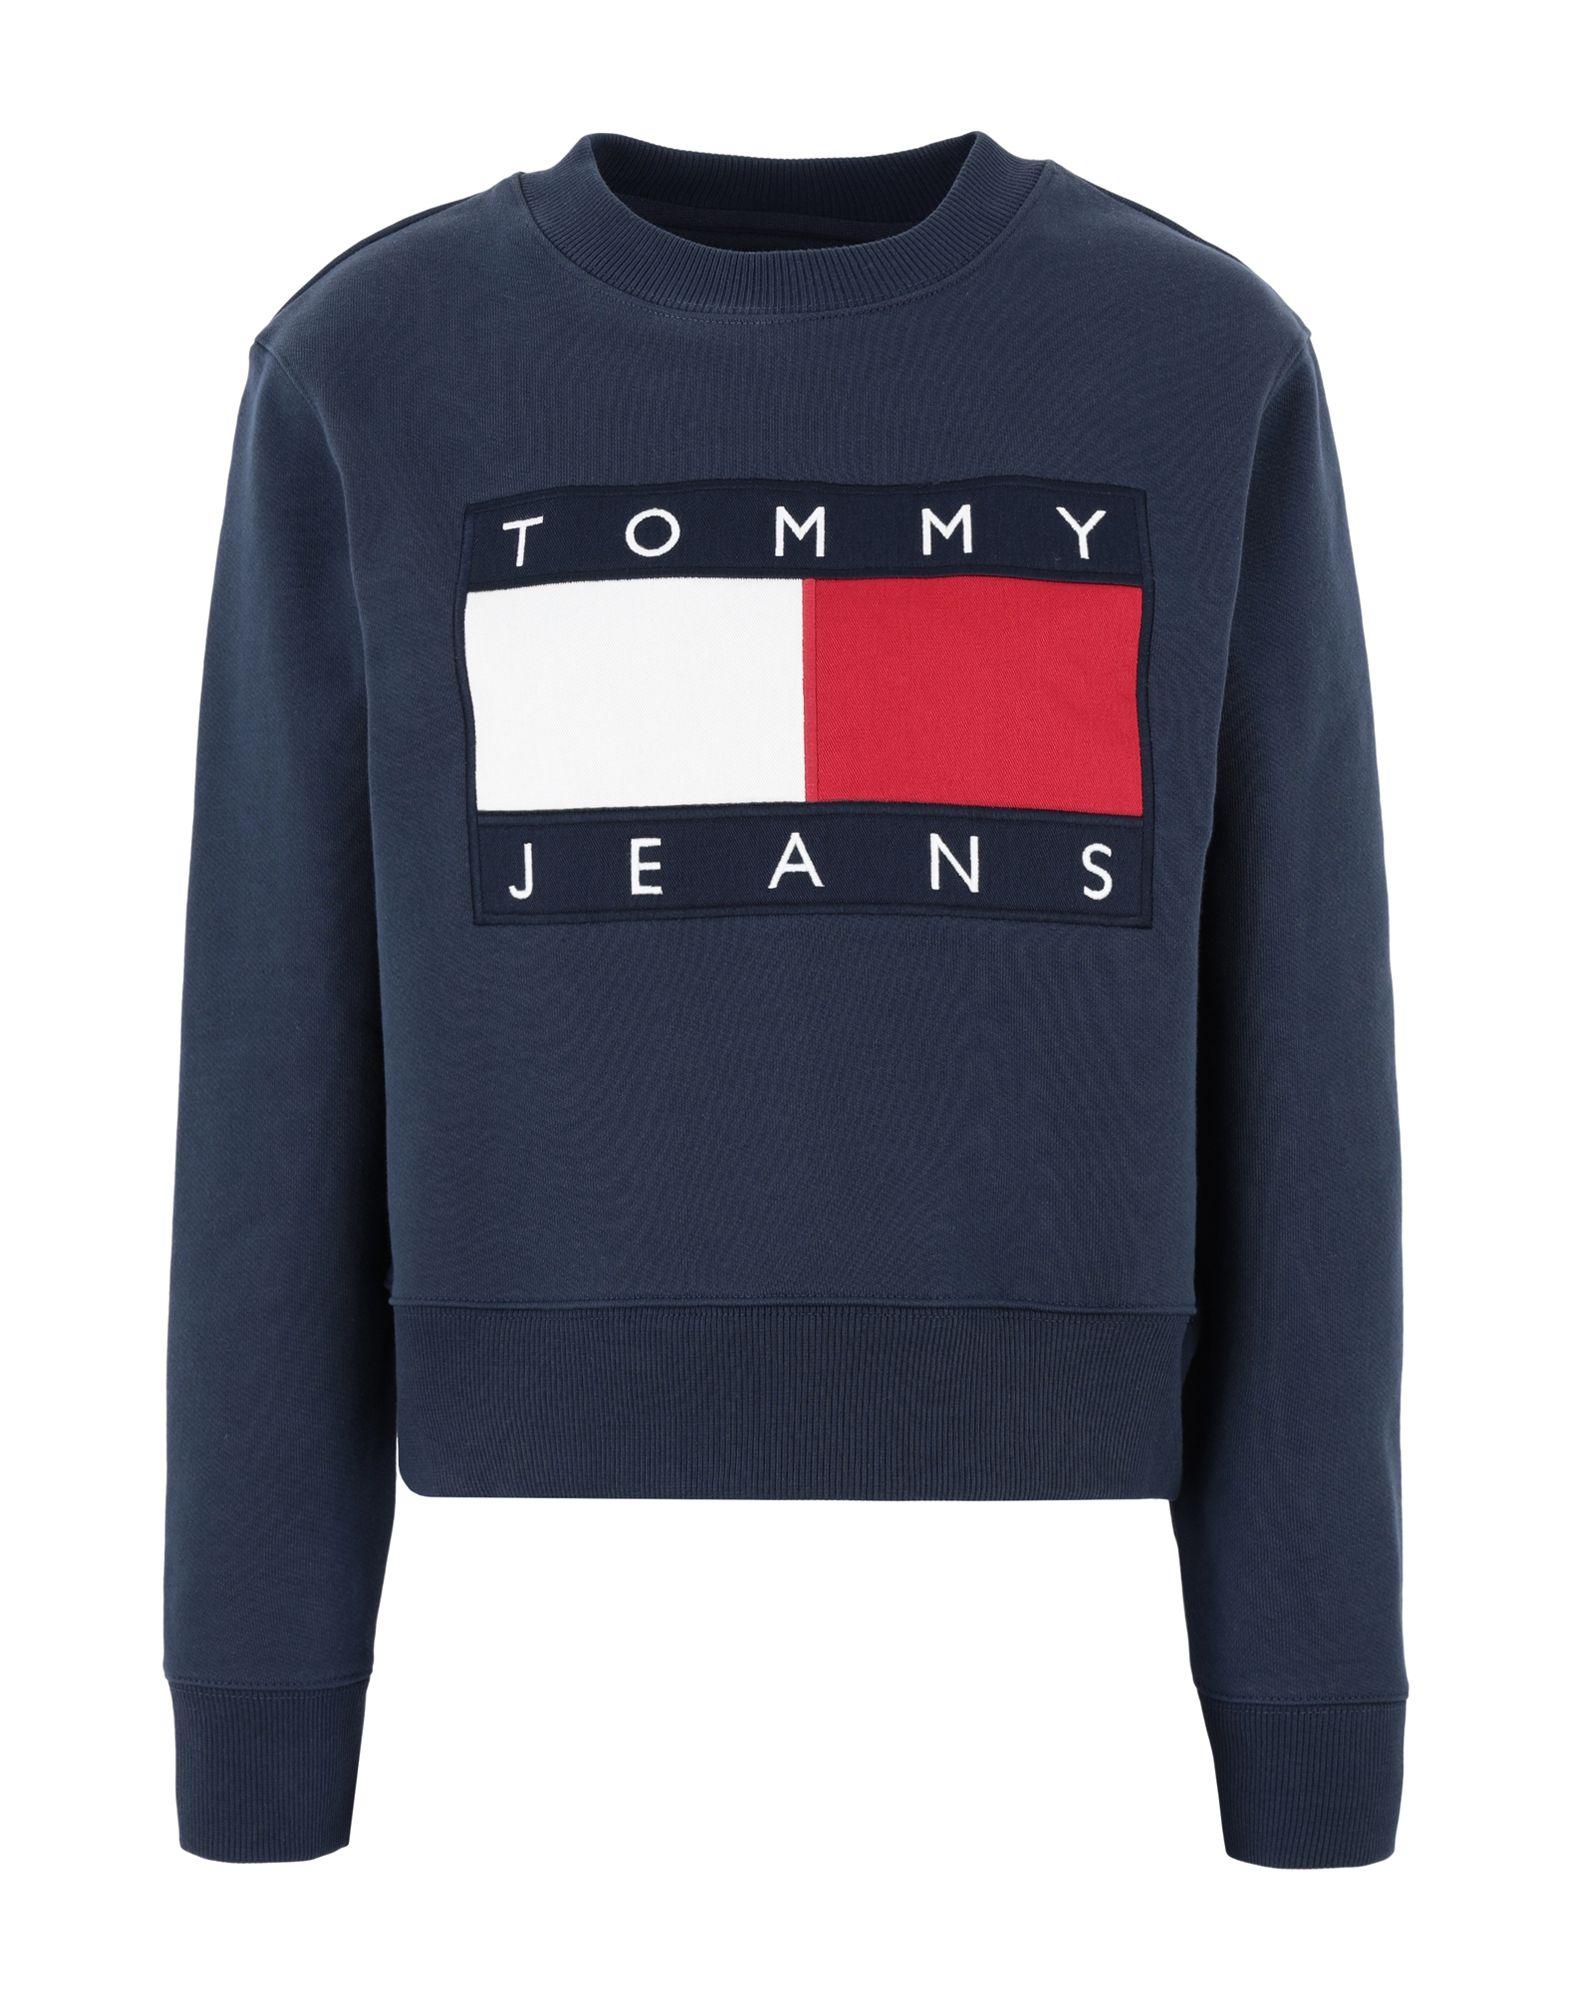   TOMMY JEANS